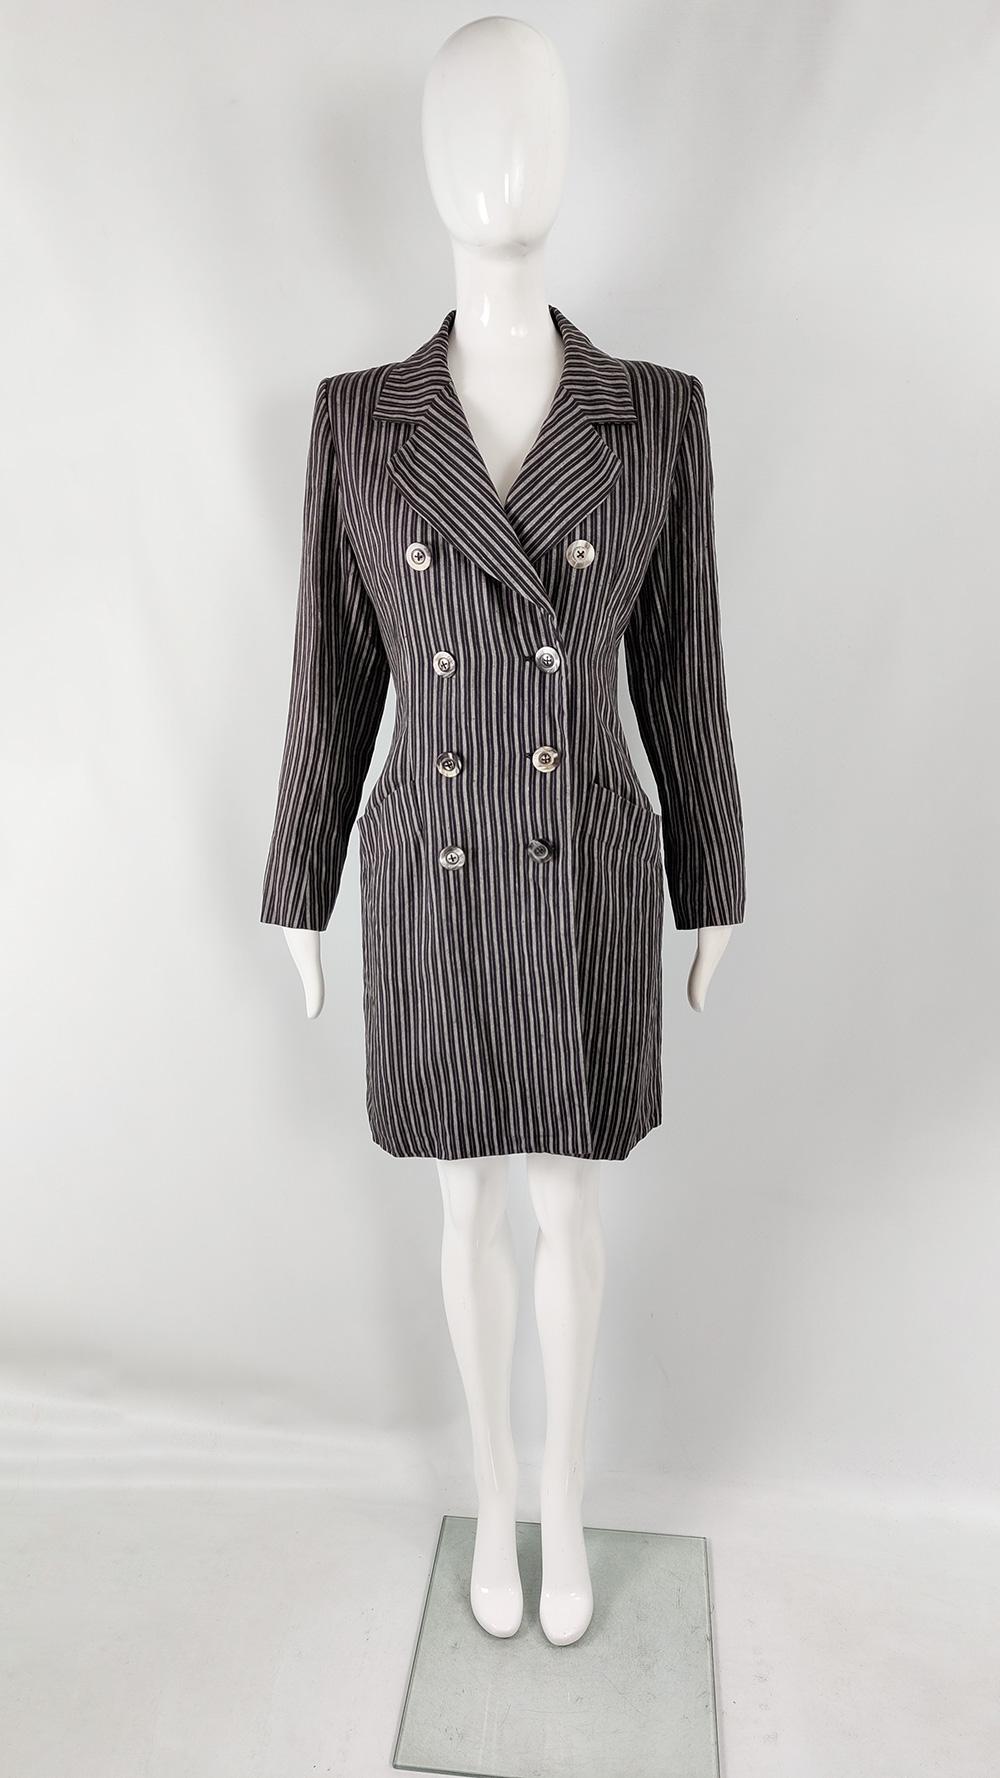 A stunning vintage womens jacket from the late 80s / early 90s by Yves Saint Laurent. Made in France from a black linen with a grey vertical pinstripe throughout. The cut is sublime, with wide shoulder pads giving a structured, high fashion look